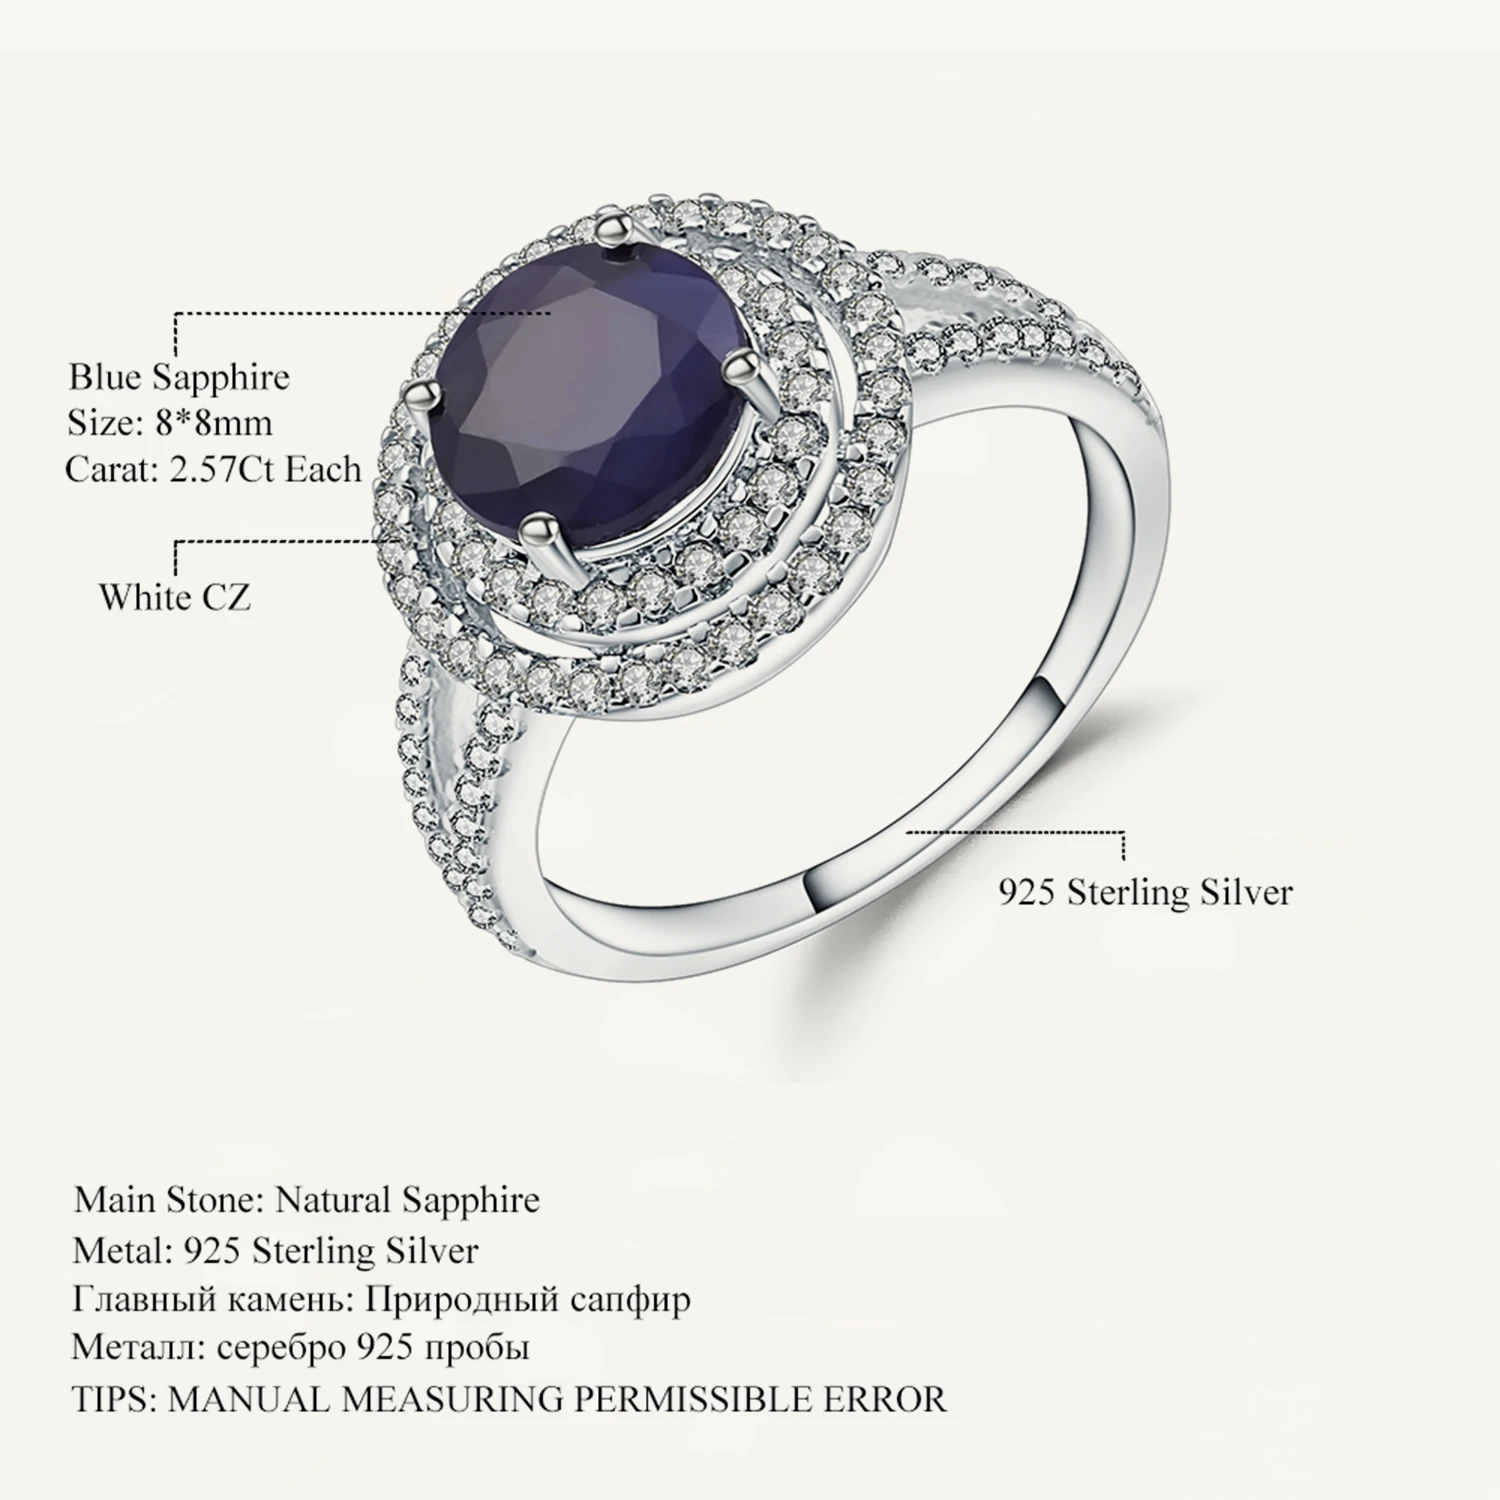 

Gem's Ballet 2.57Ct Natural Blue Sapphire Round Gemstone Ring 925 Sterling Silver Classic Rings For Women Wife Gift Fine Jewelry